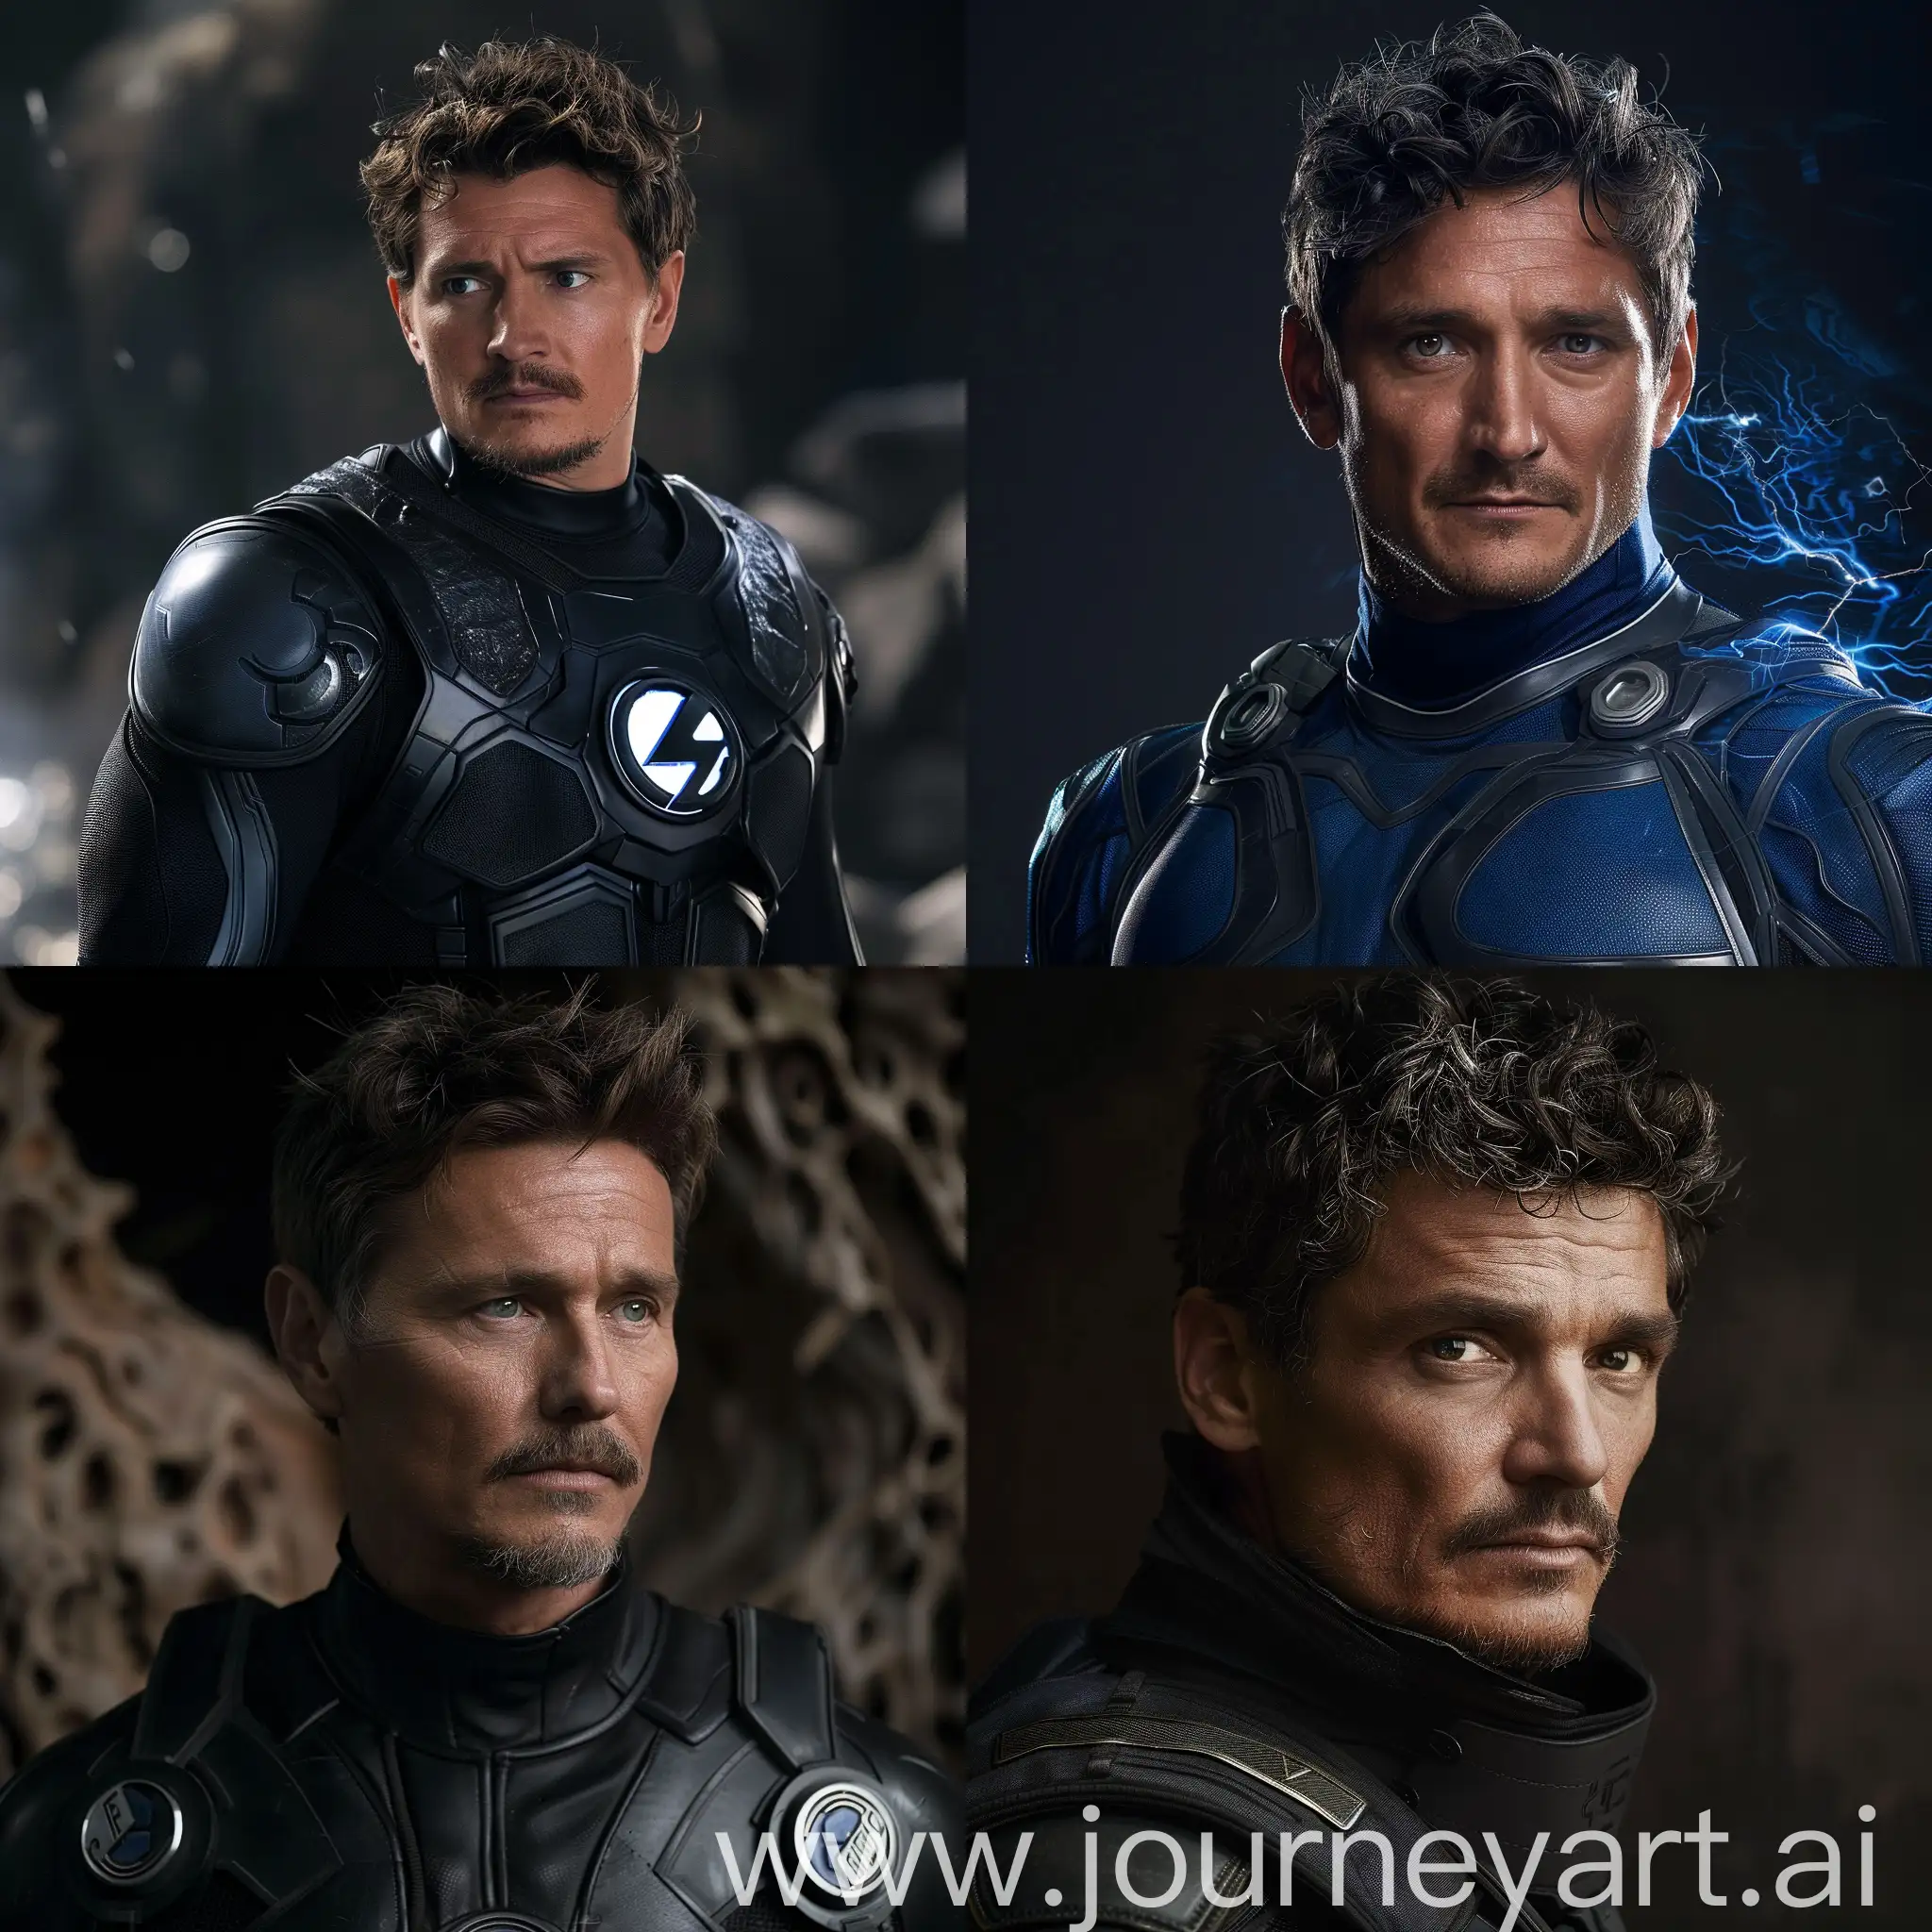 Pedro-Pascal-as-Reed-Richards-from-Fantastic-Four-Portrait